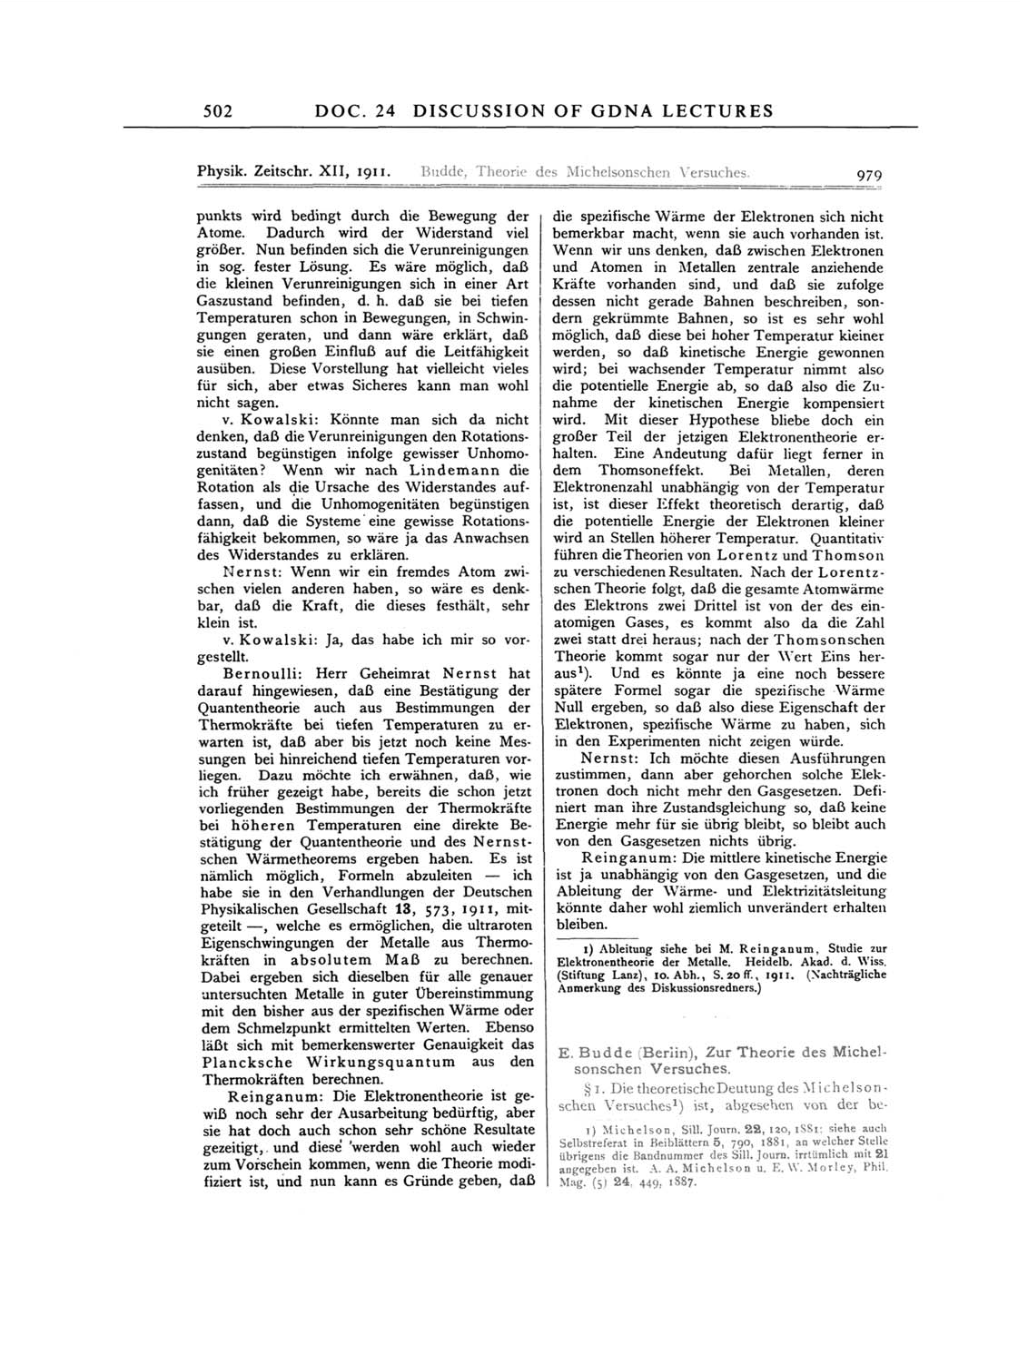 Volume 3: The Swiss Years: Writings 1909-1911 page 502